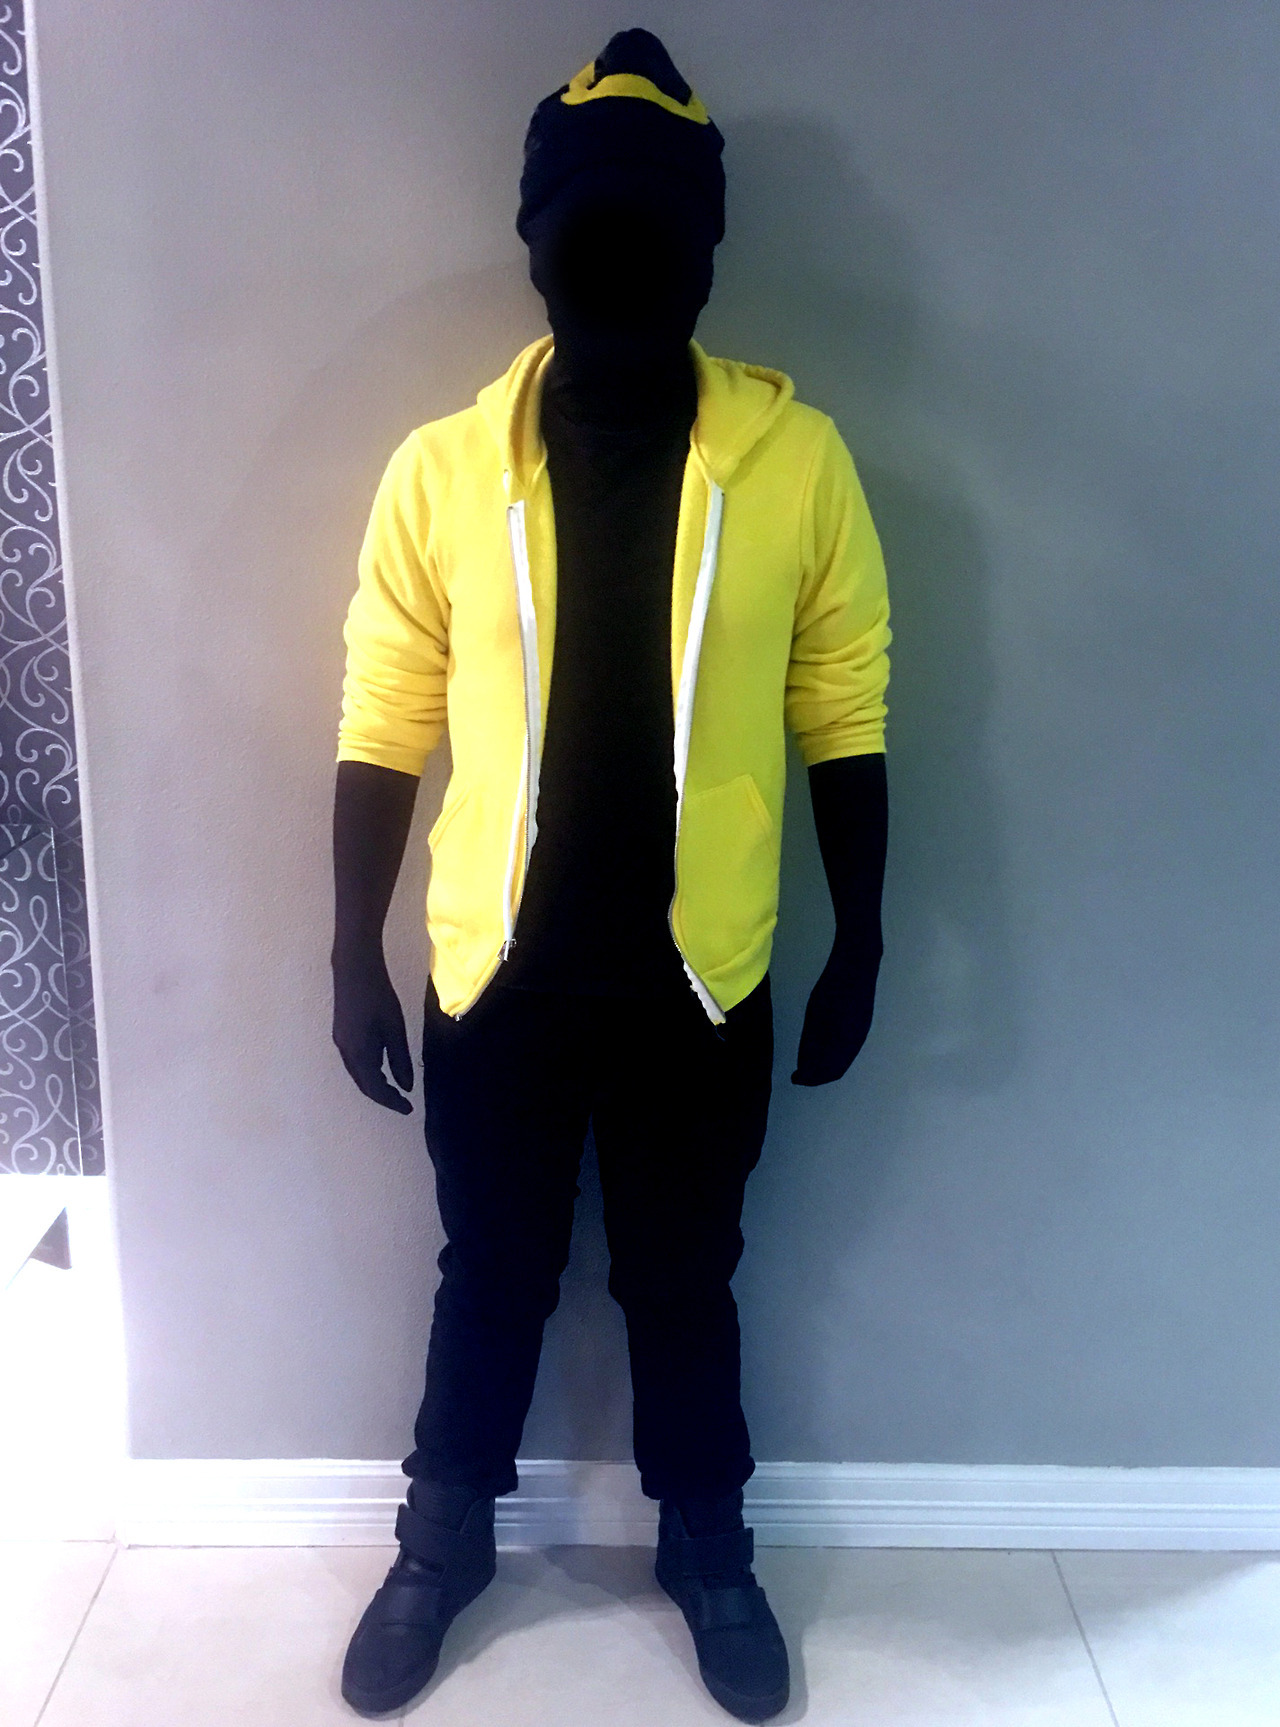 lefttrigger64:  pan-pizza:my morph suit came in. Now I can do onscreen Vlogs for